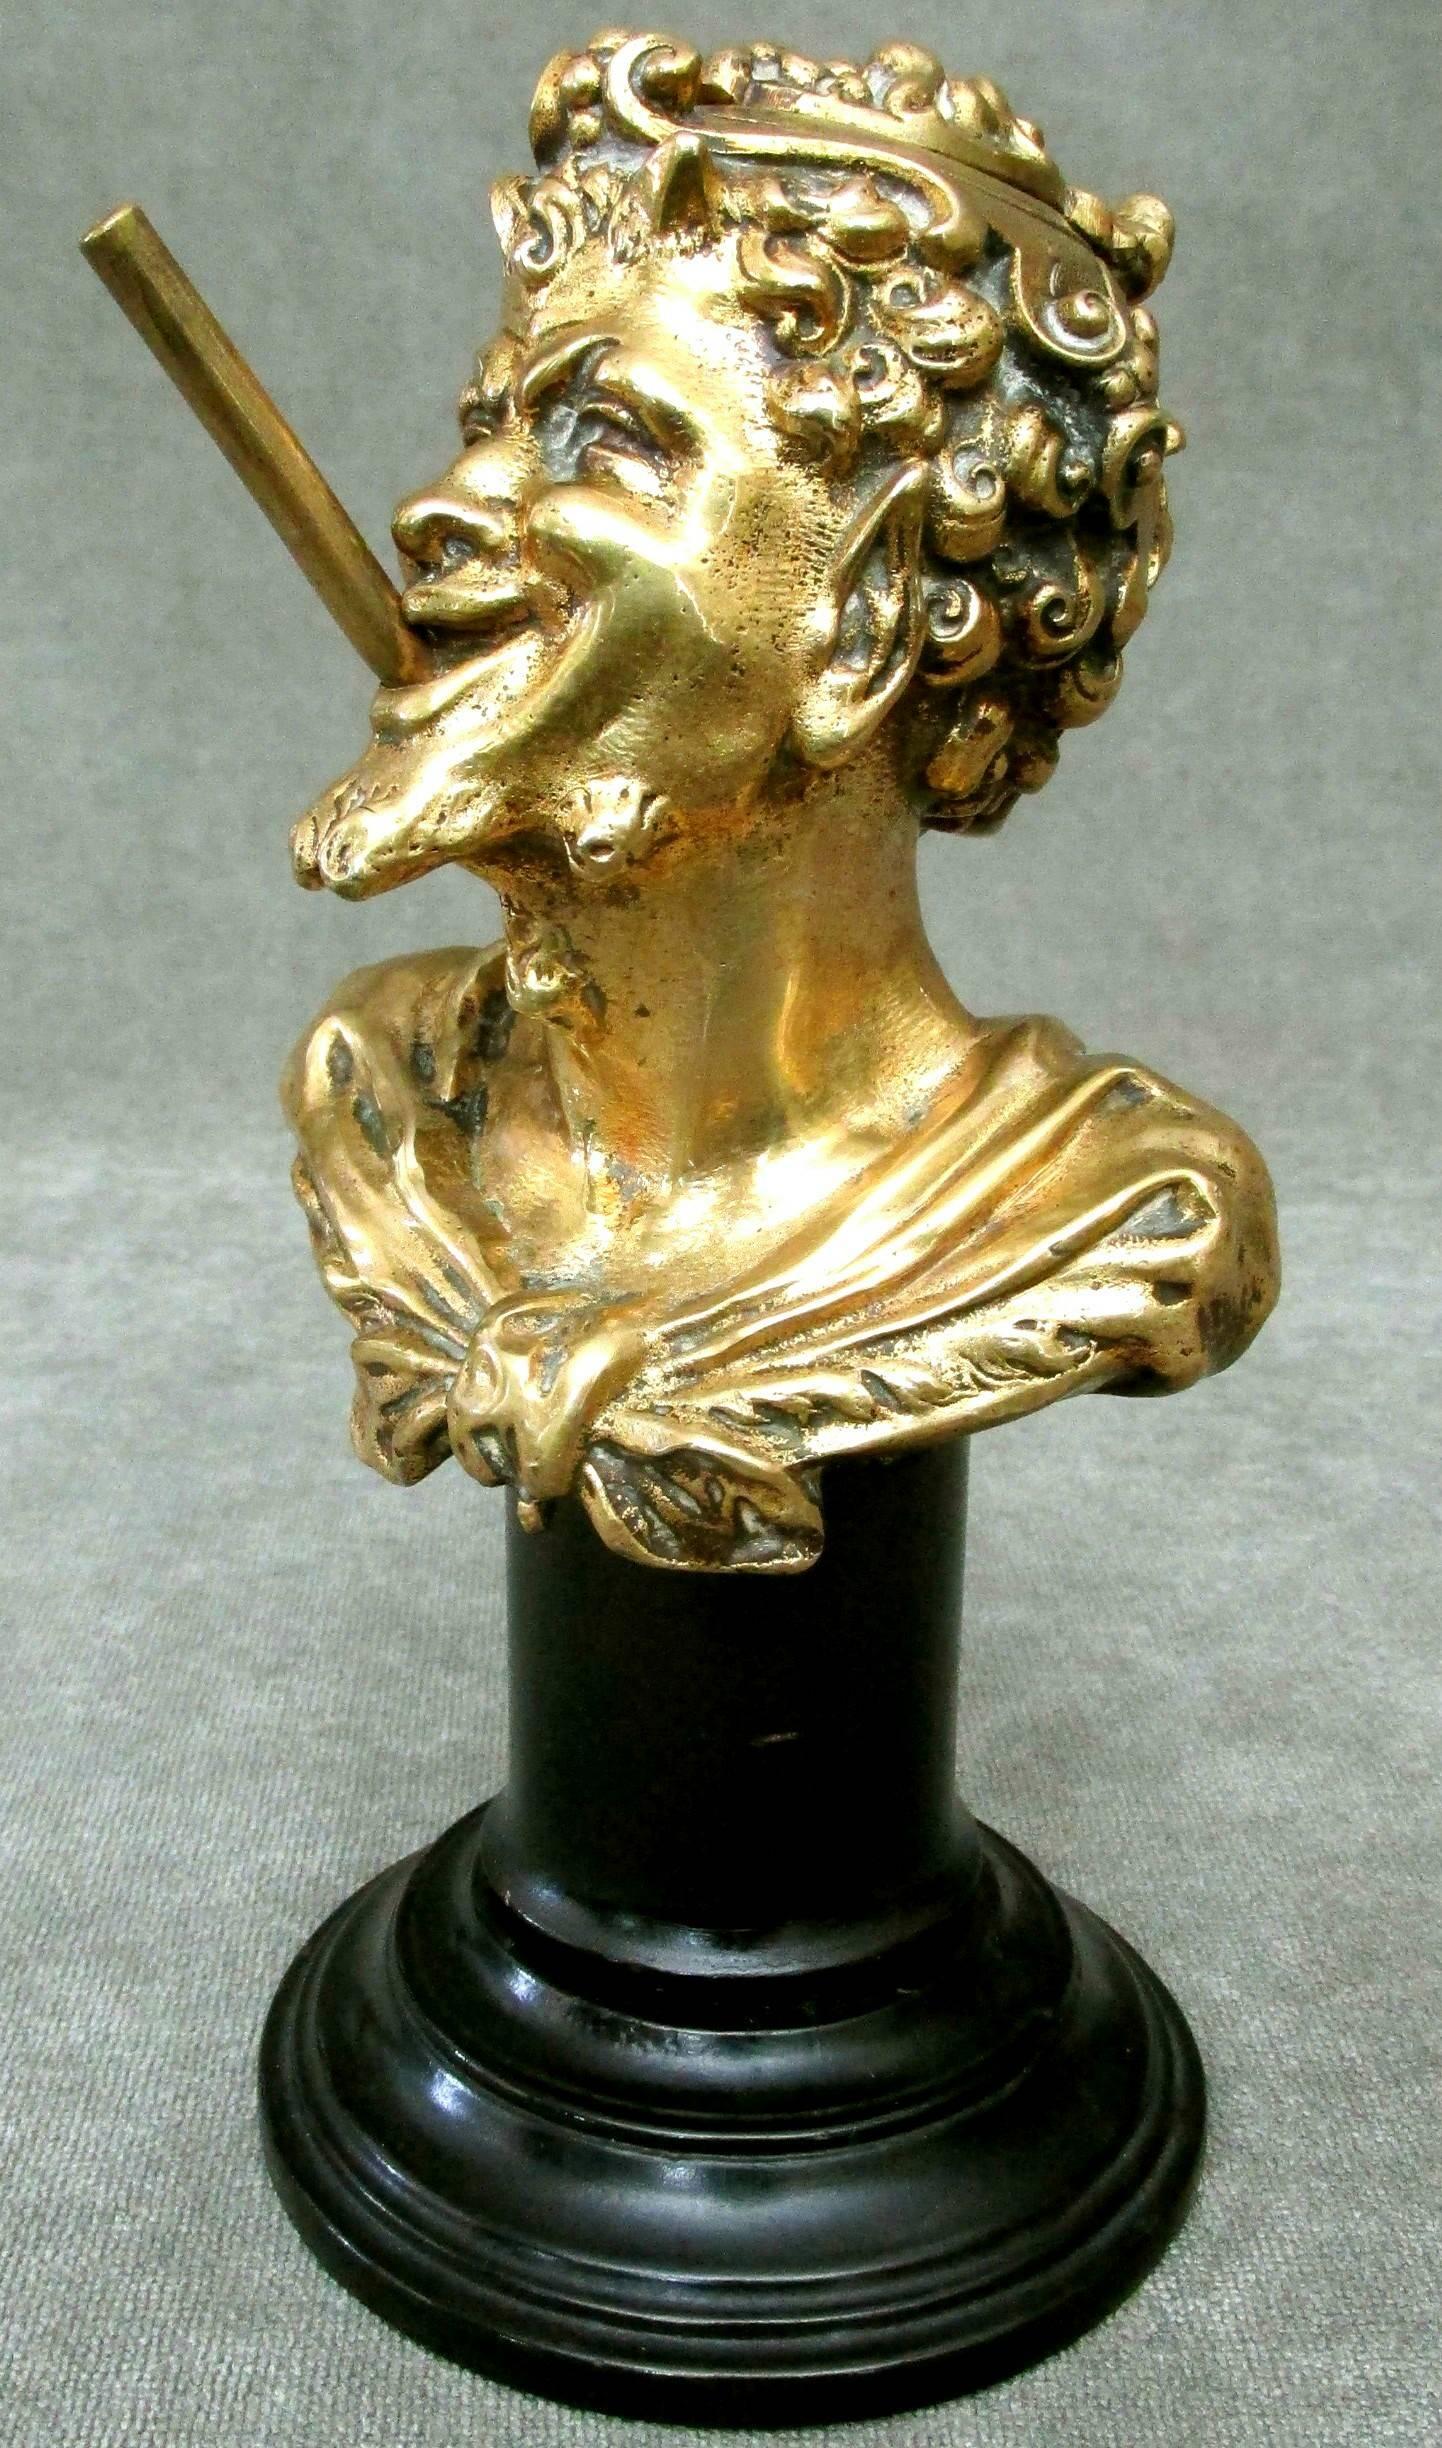 The finely cast and chiseled features of a gilt bronze satyr clenching a ‘cigar’ shaped wick holder in his mouth, the head fitted with a hinged skullcap opening to a reservoir. Raised upon a turned and ebonized wooden column.

International clients